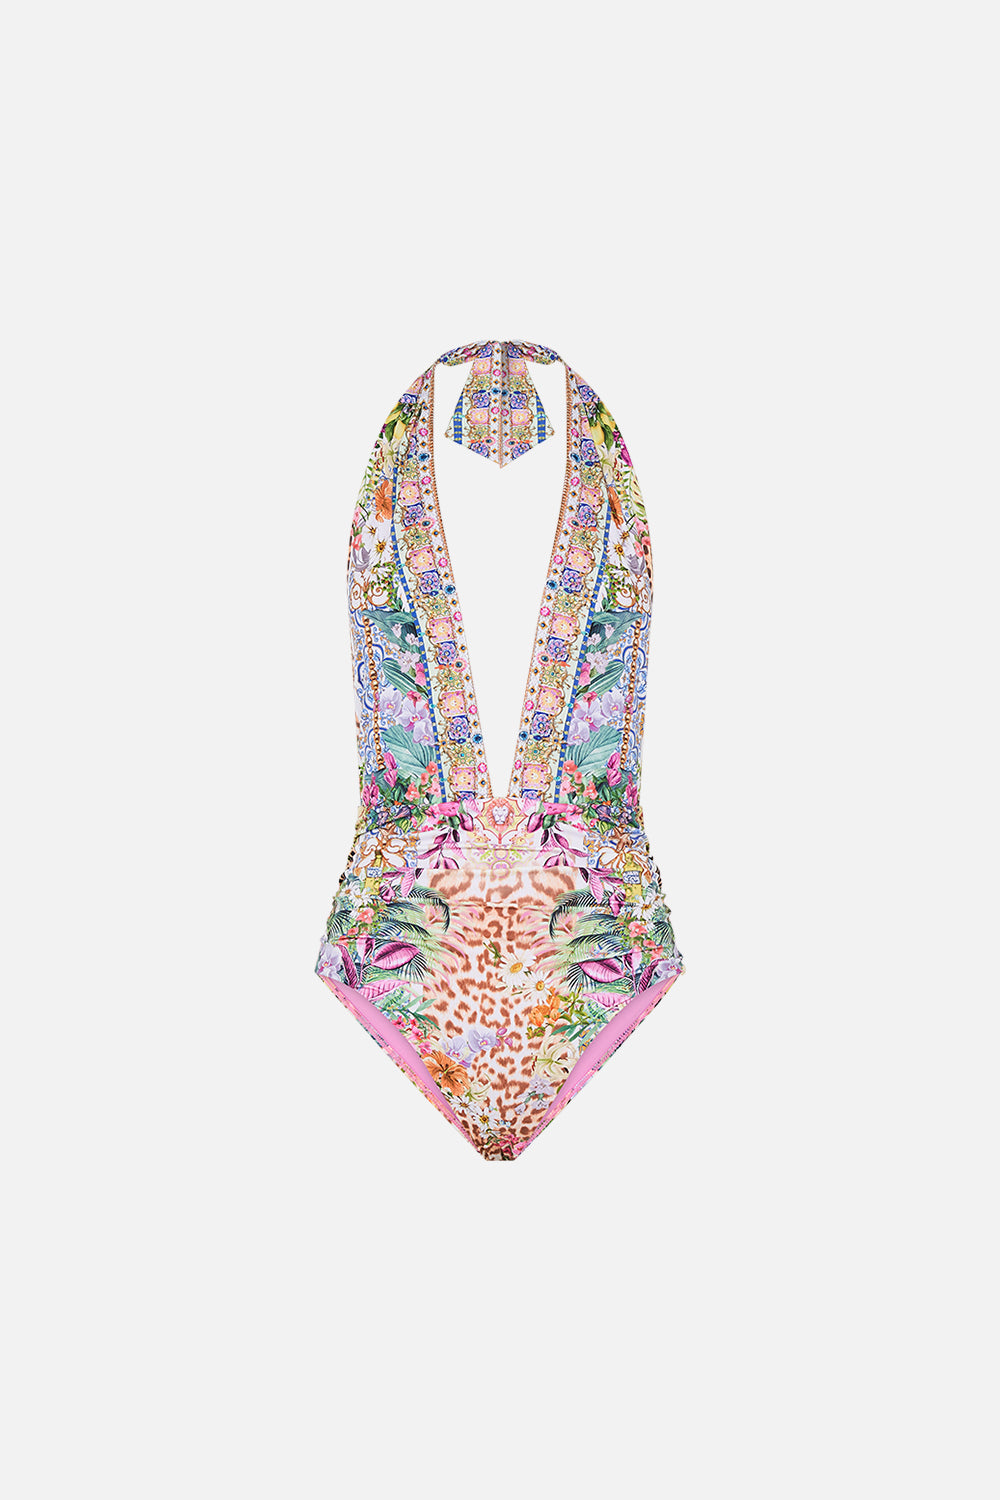 Product view of CAMILLA resortwear floral onepiece swimsuit in Flowers Of Neptune print 